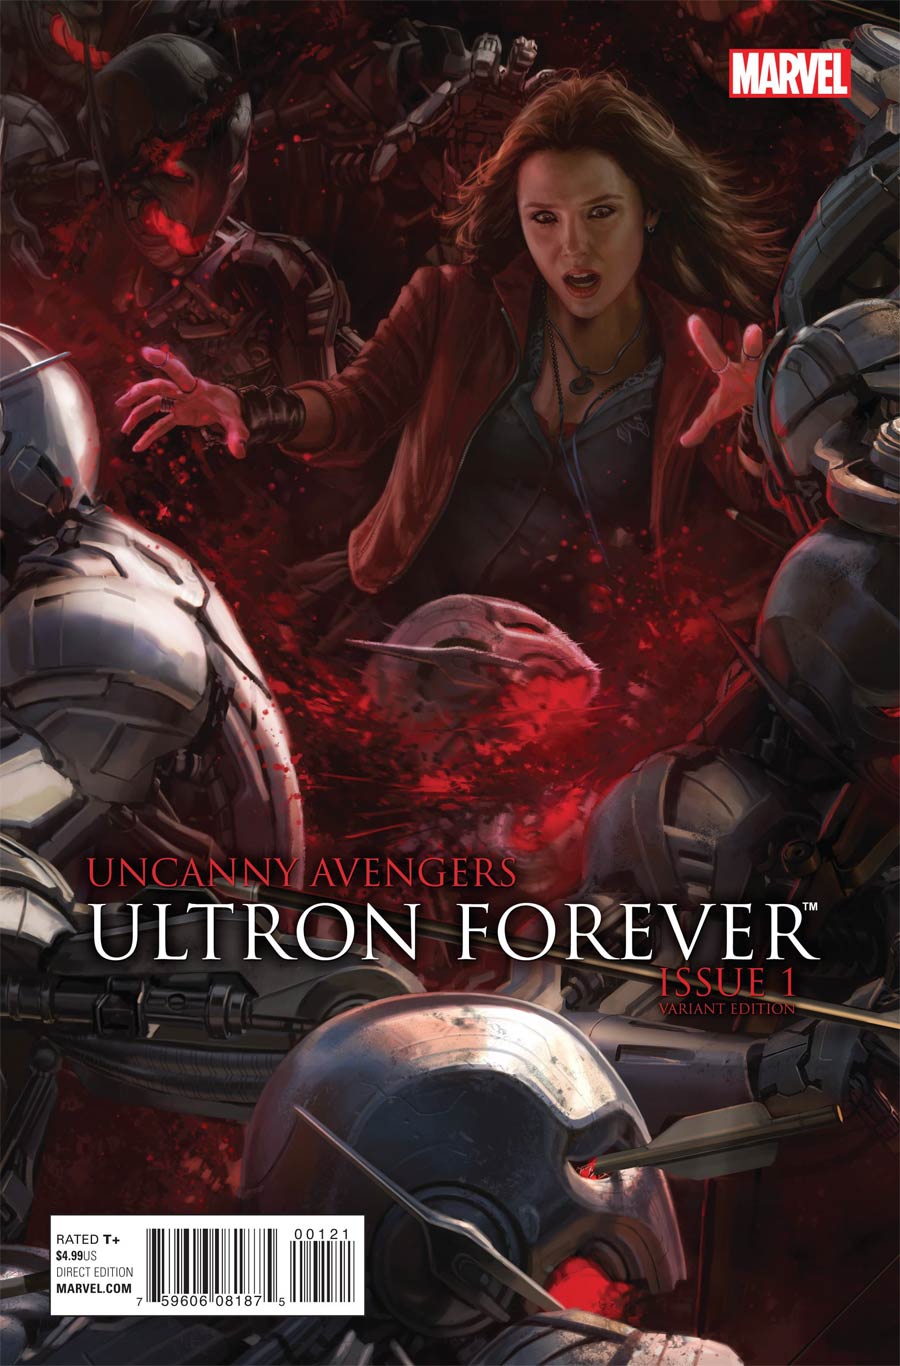 Uncanny Avengers Ultron Forever #1 Cover C Avengers Age Of Ultron Movie Connecting H Variant Cover (Ultron Forever Part 3)